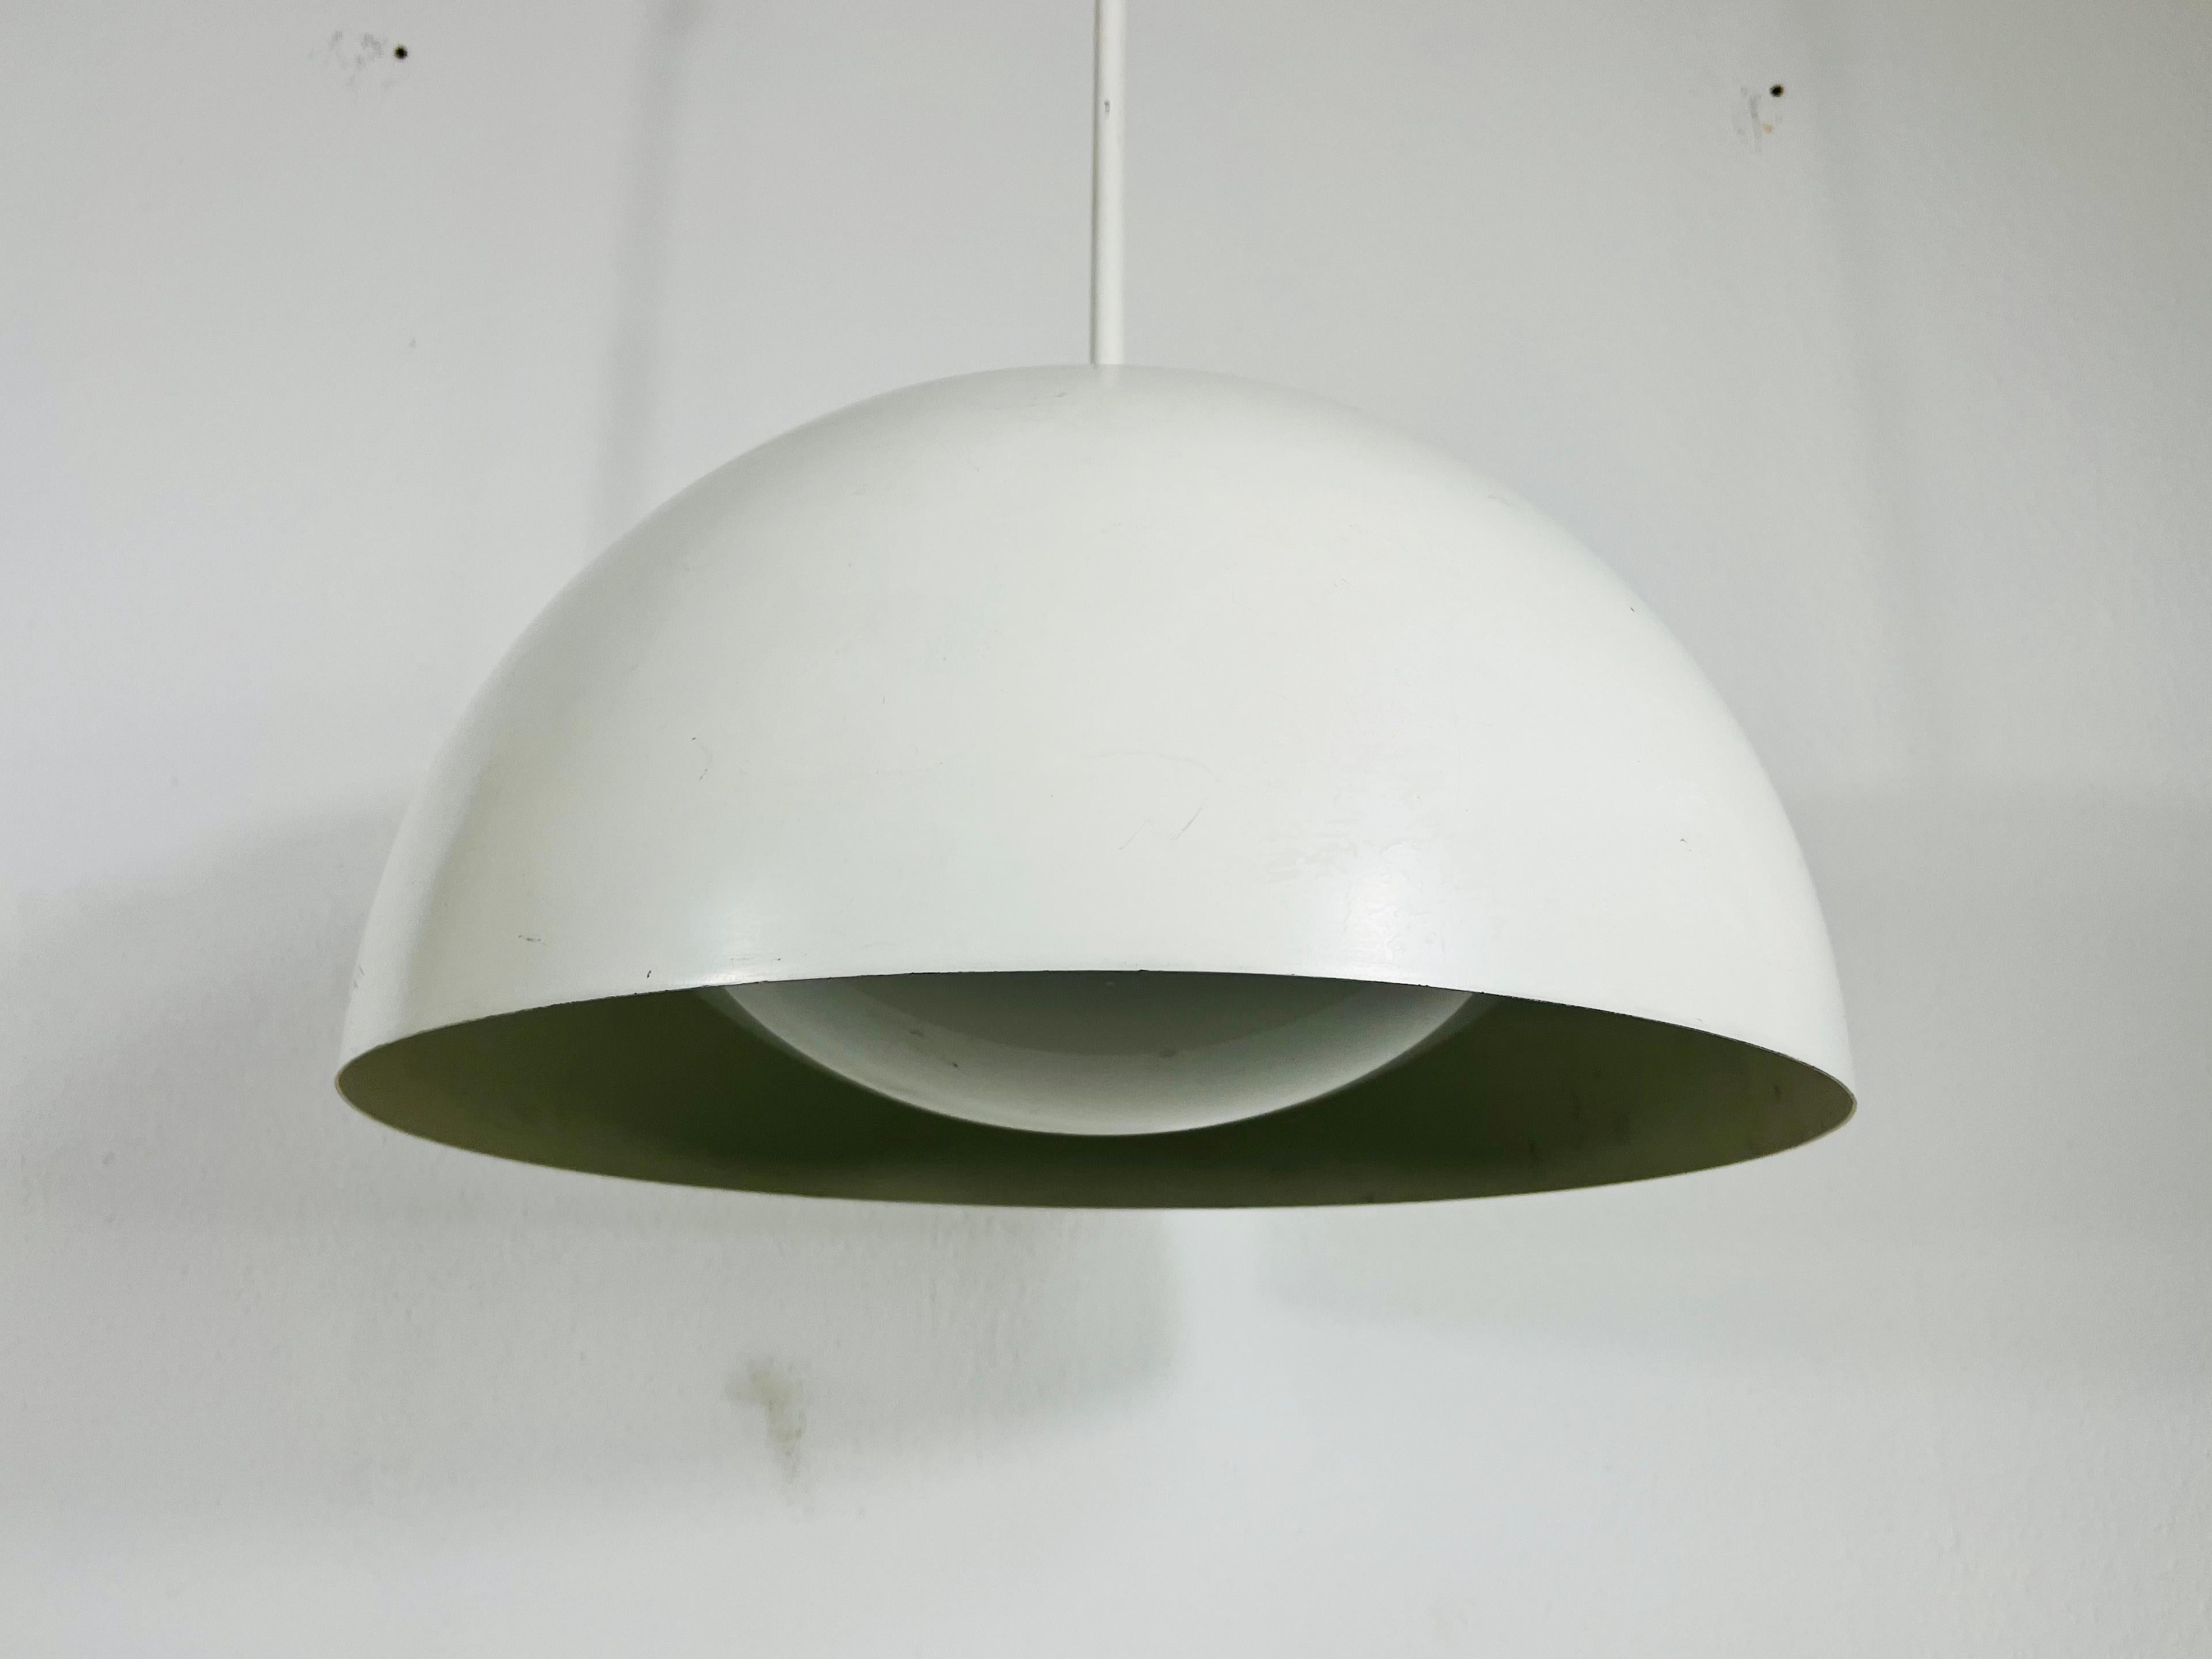 Vintage pendant lamp in the style of Temde in the 1970s. It is made from glass and metal.

Measures: 

Height: 25-120 cm

Diameter: 45 cm 

The light requires one E27 light bulb. Works with both 120/220V. Good vintage condition.

Free